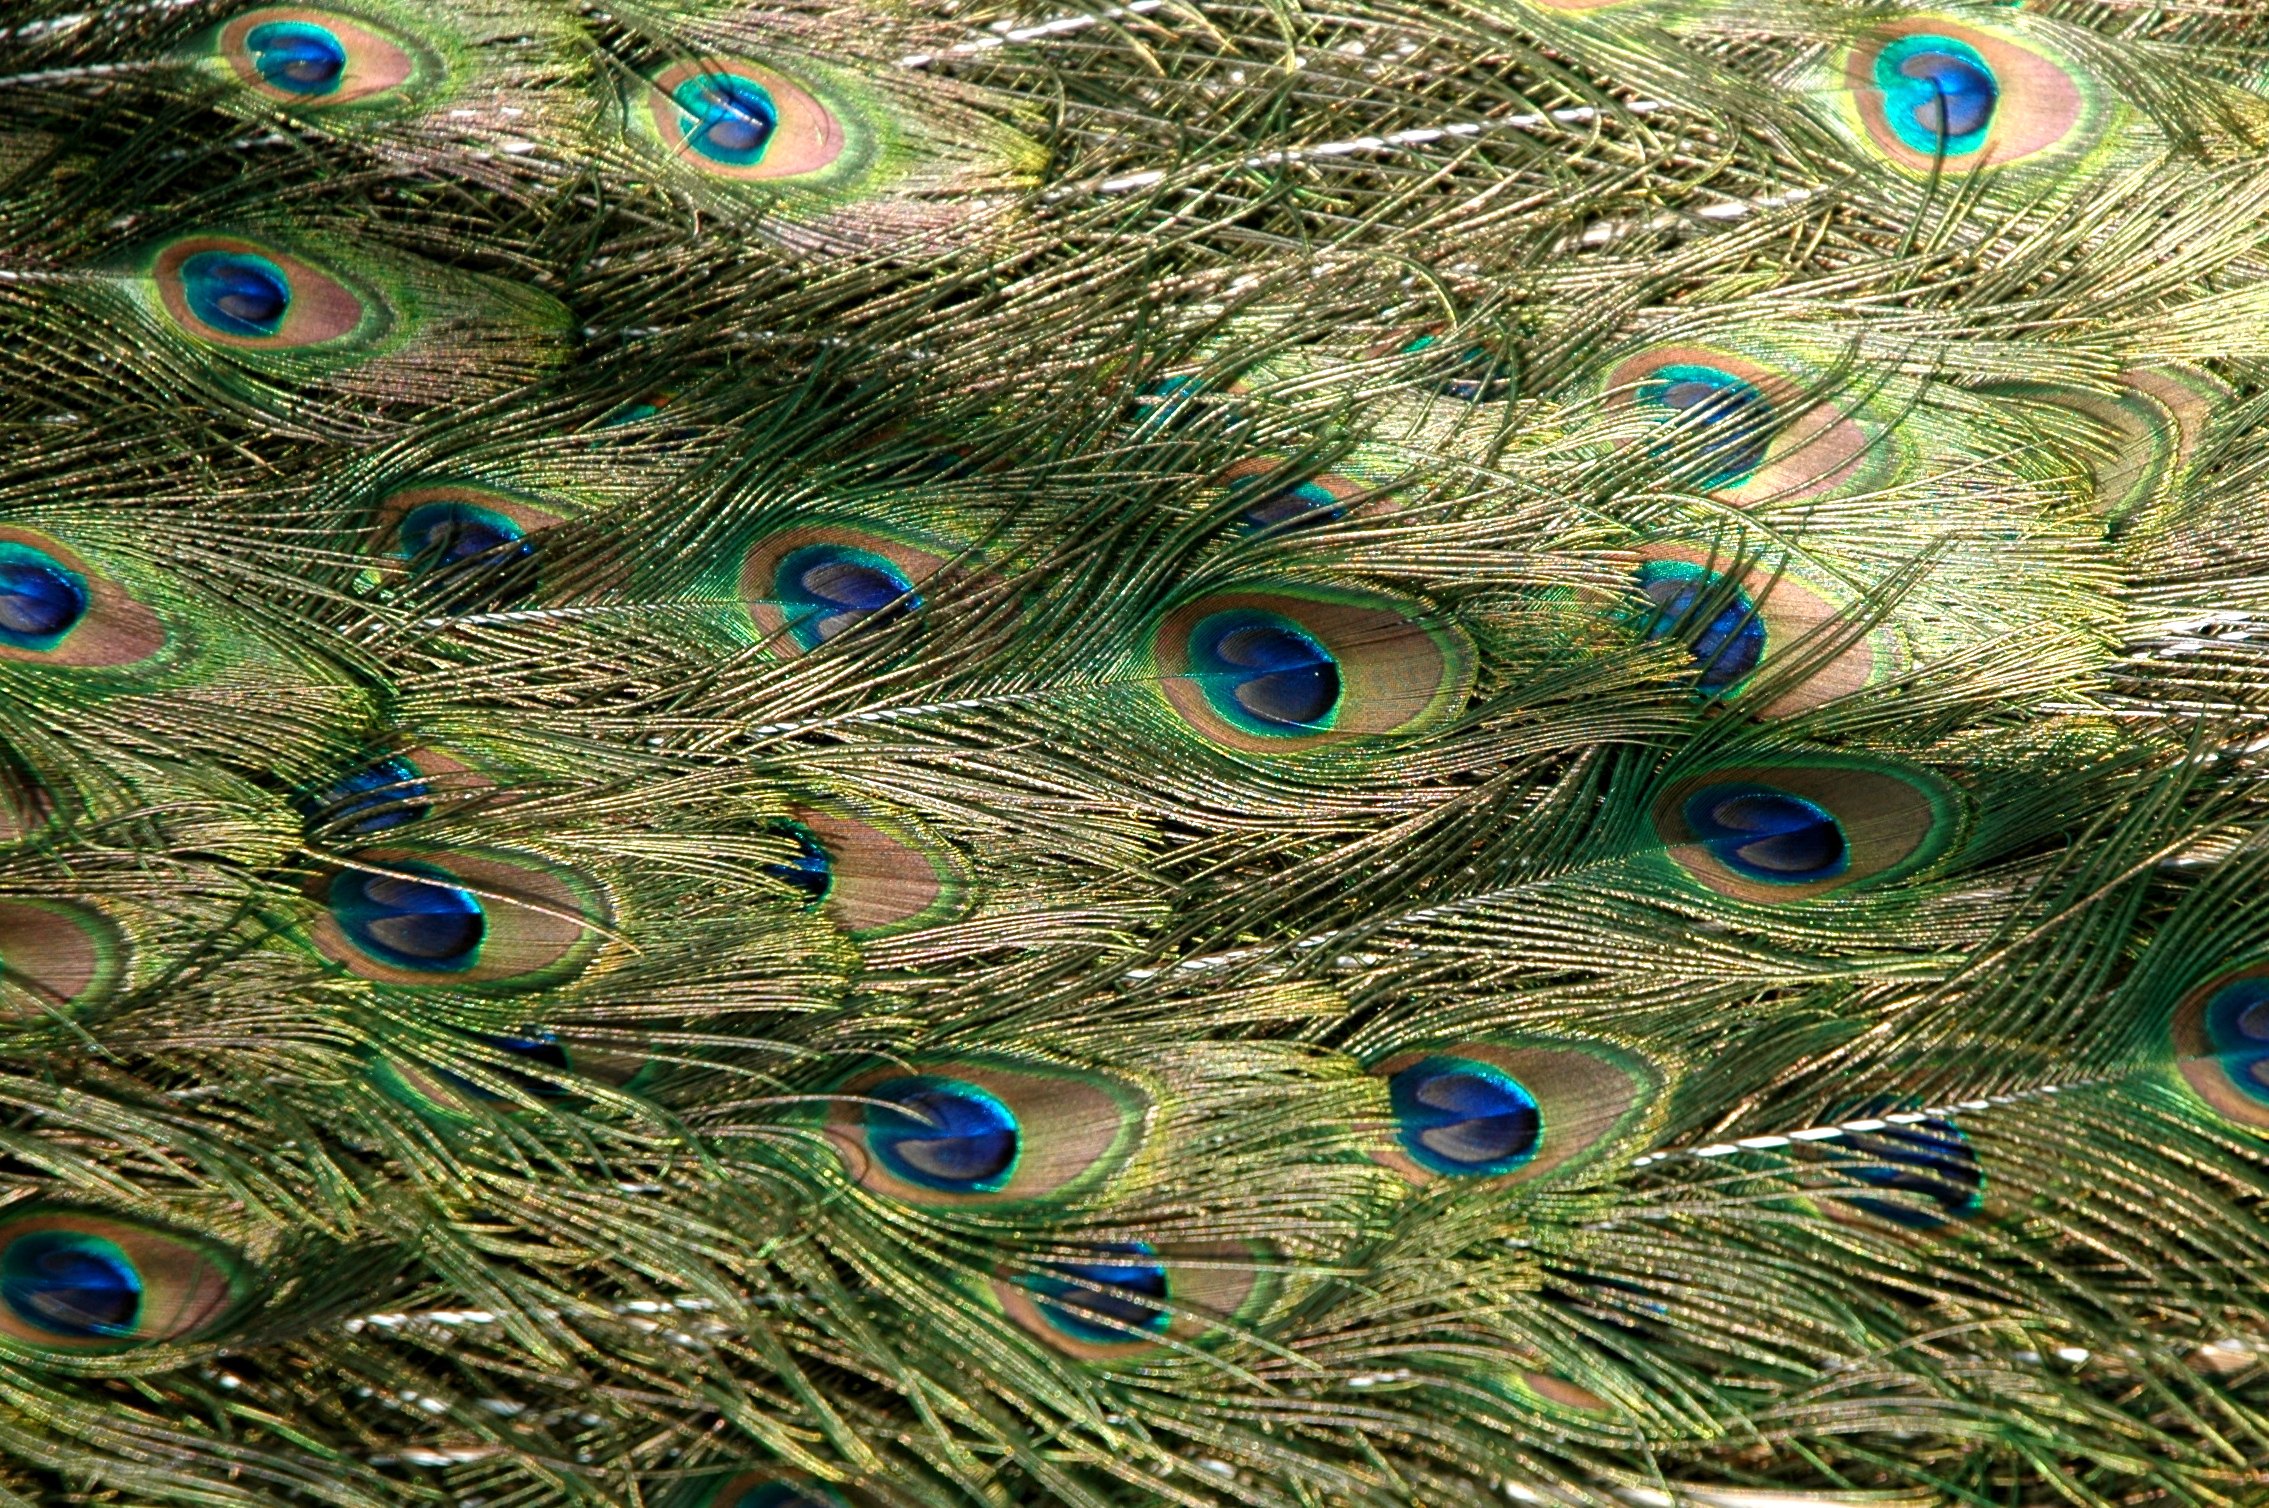 a large, colorful, peacock feather with long feathers spread